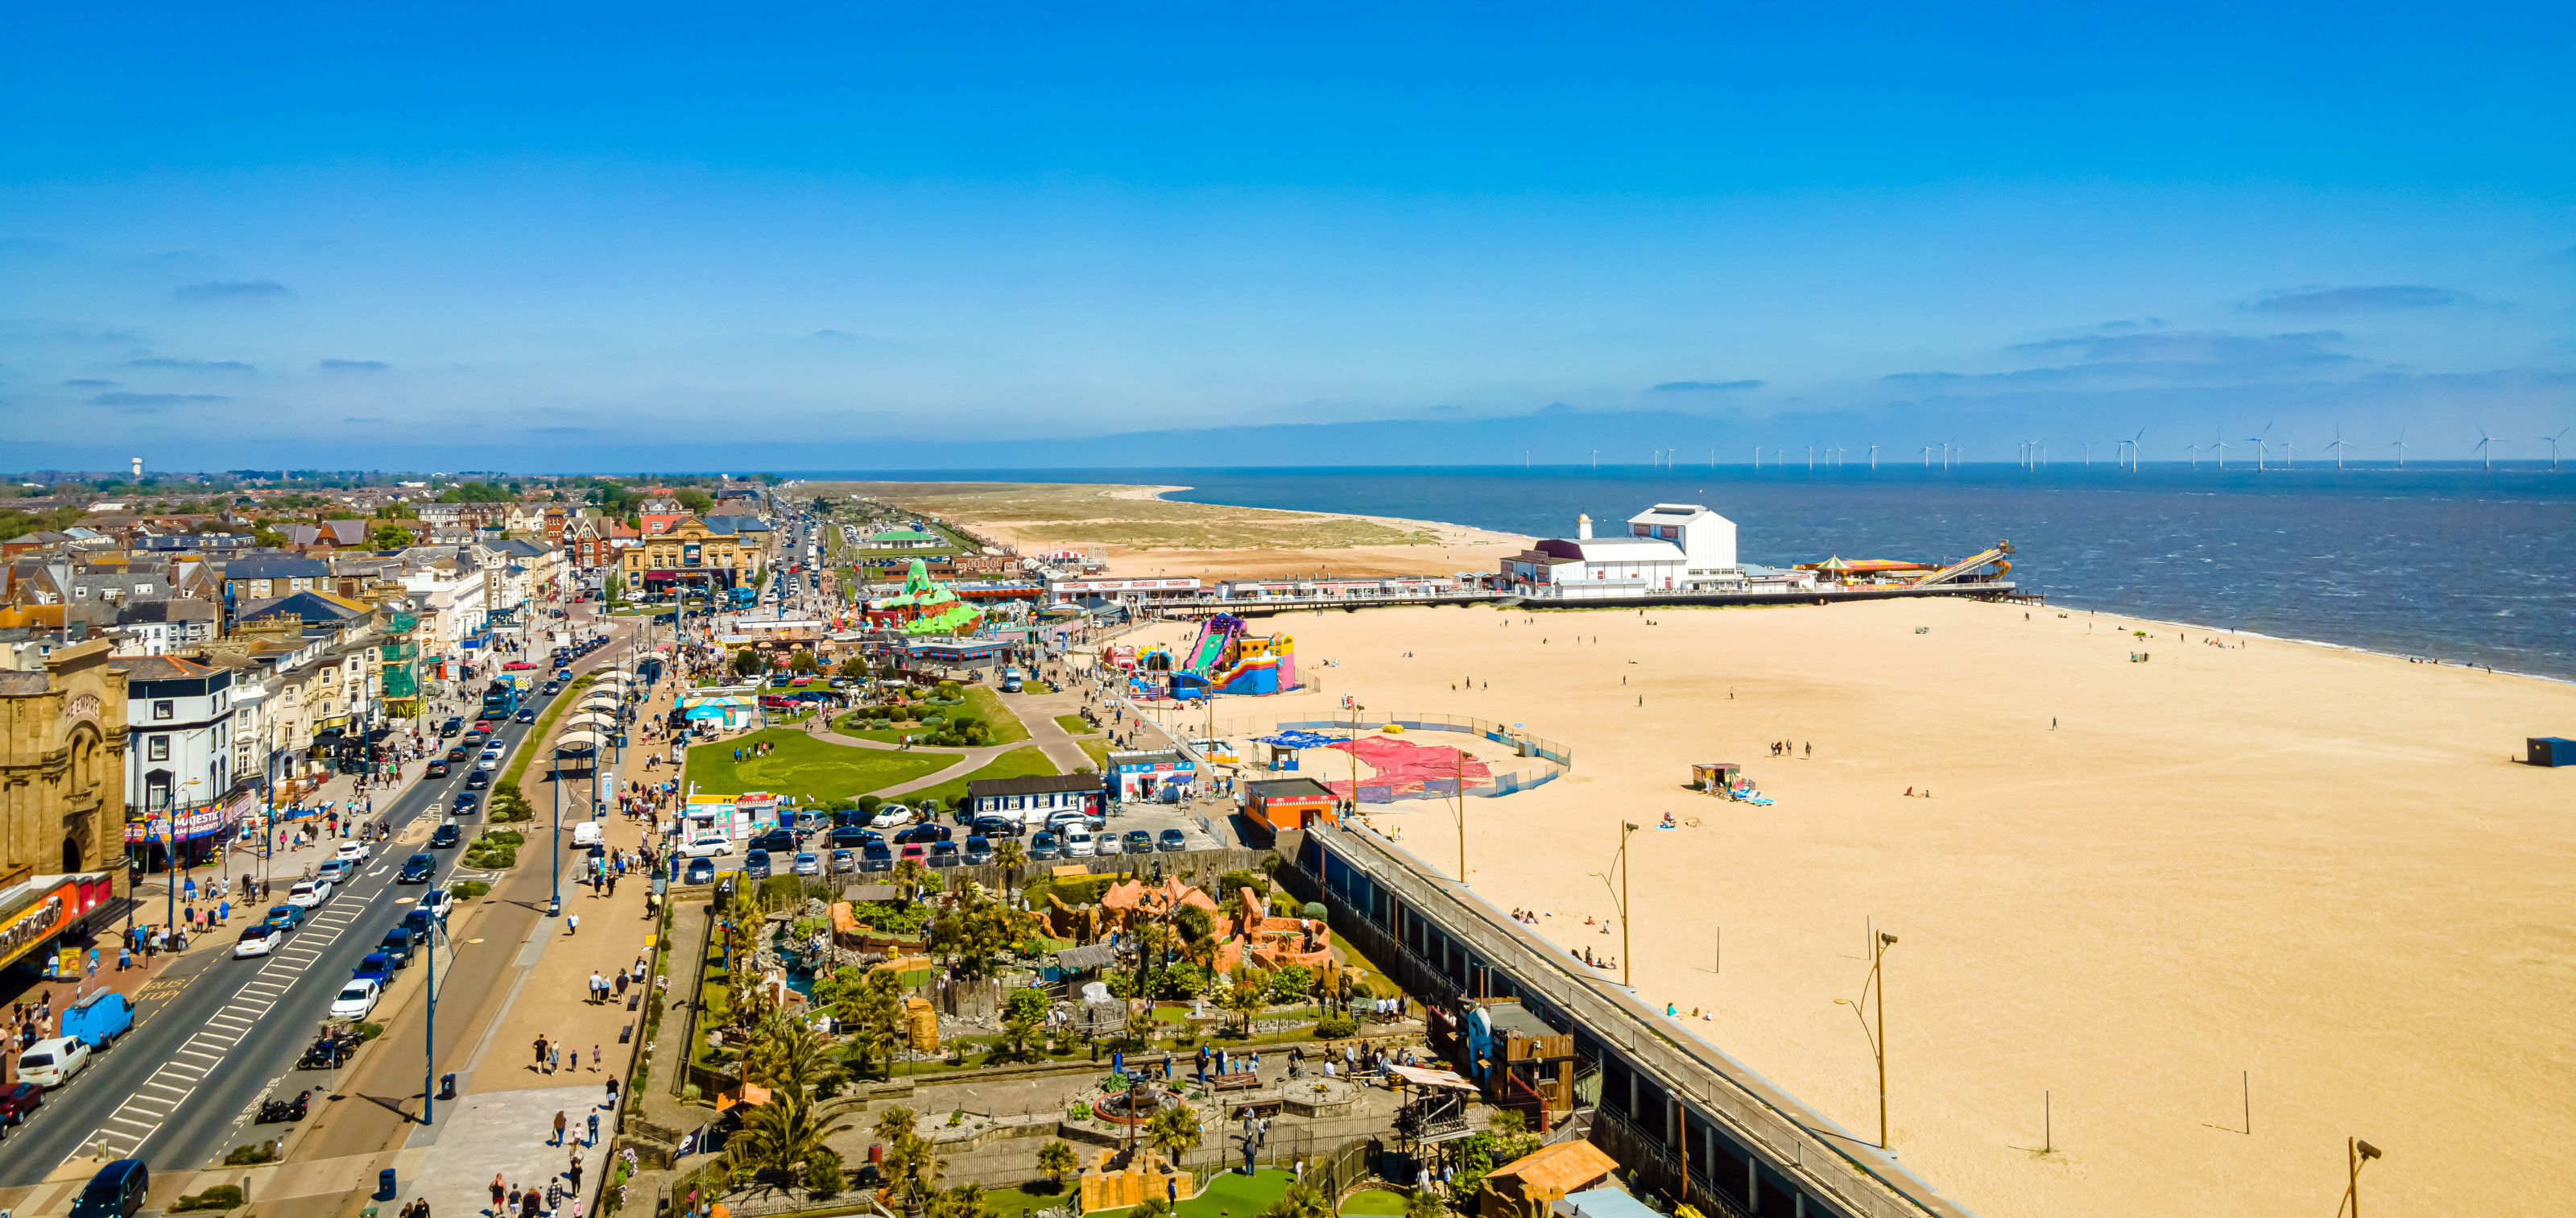 Campsites near the beach in Great Yarmouth, Norfolk